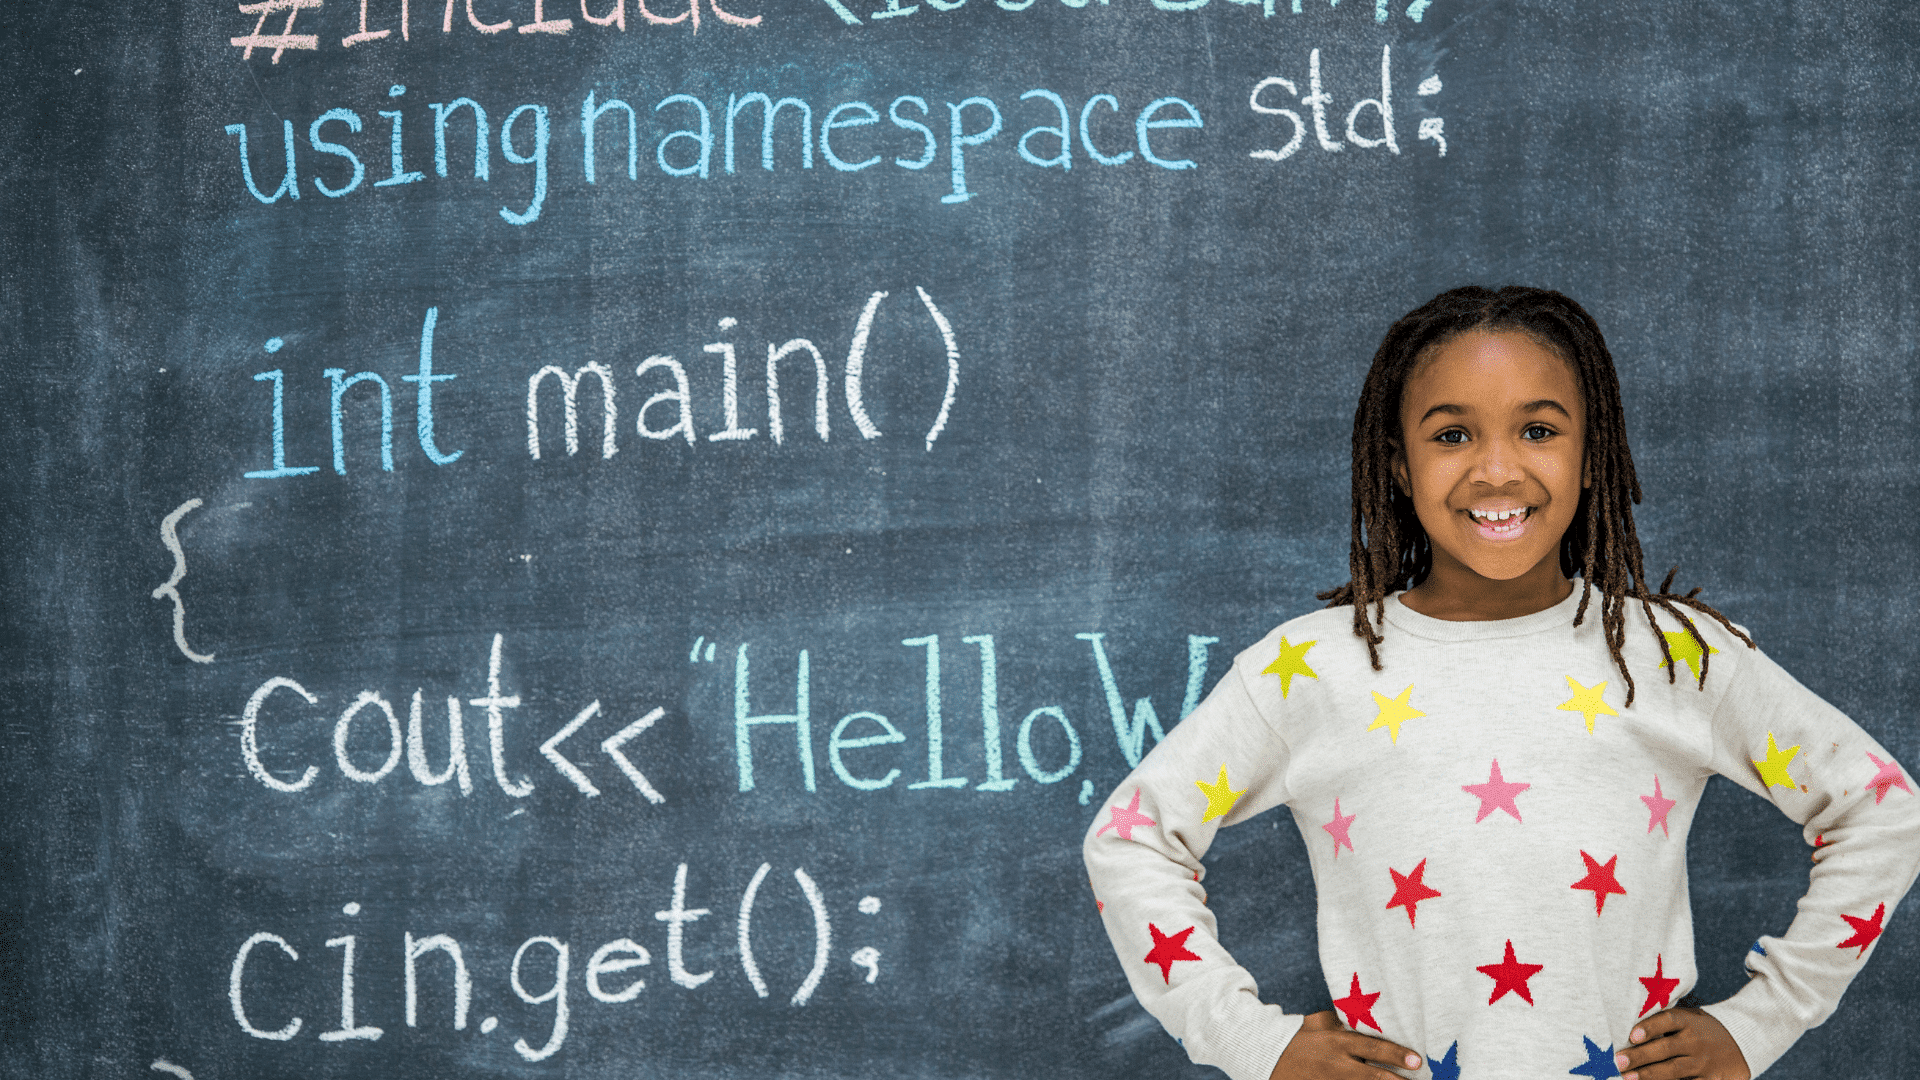 A girl stands in front of a chalkboard with code written on it